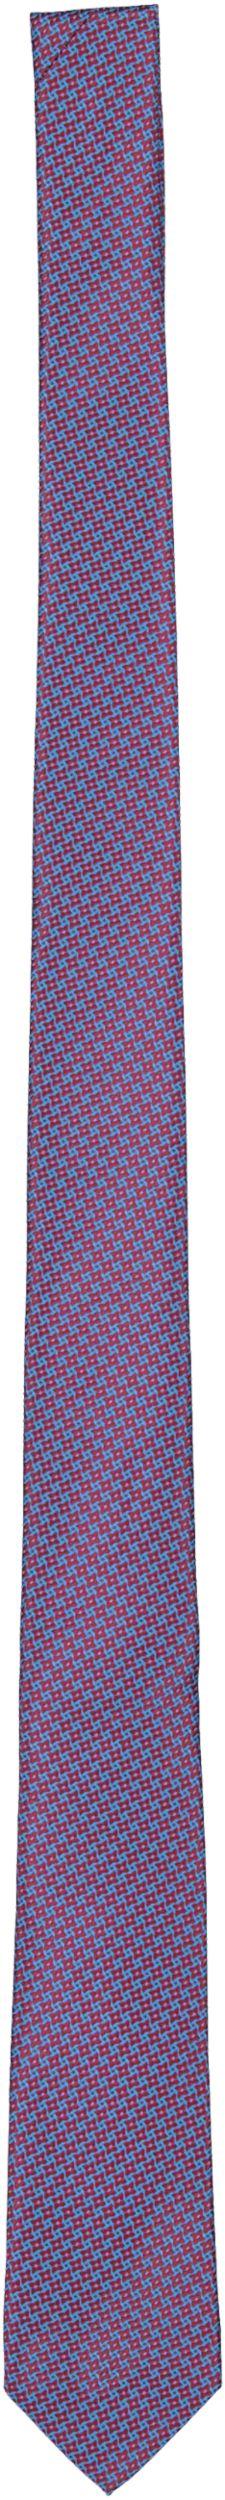 T.O. Collection Mens Necktie - TO222